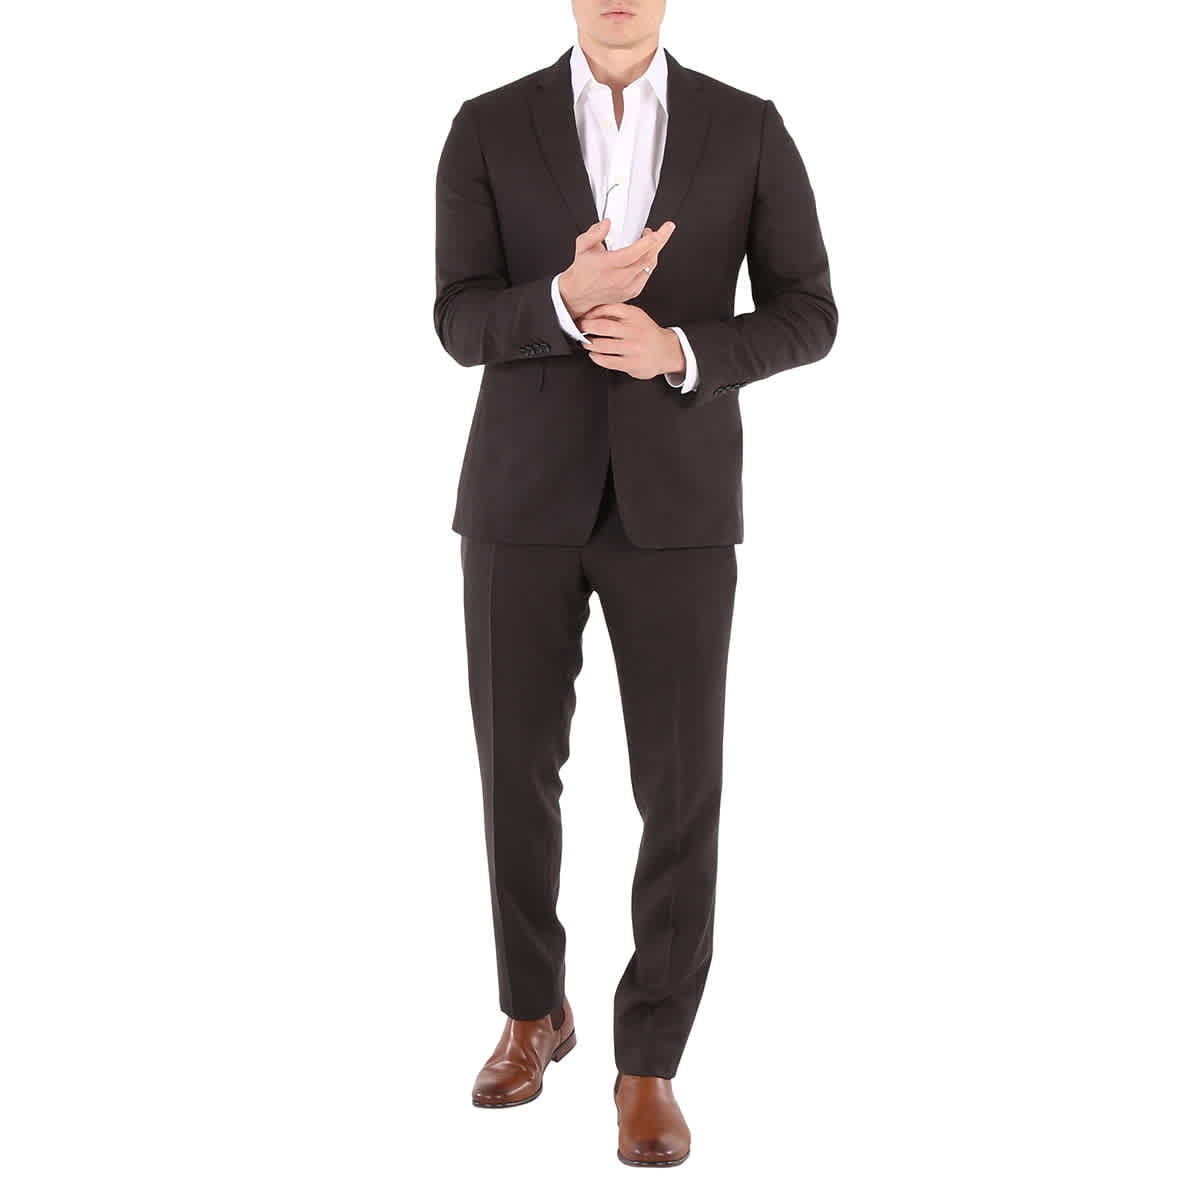 How To Buy Off-The-Rack Suits & Top 10 Best Ready-To-Wear Suit Brands -